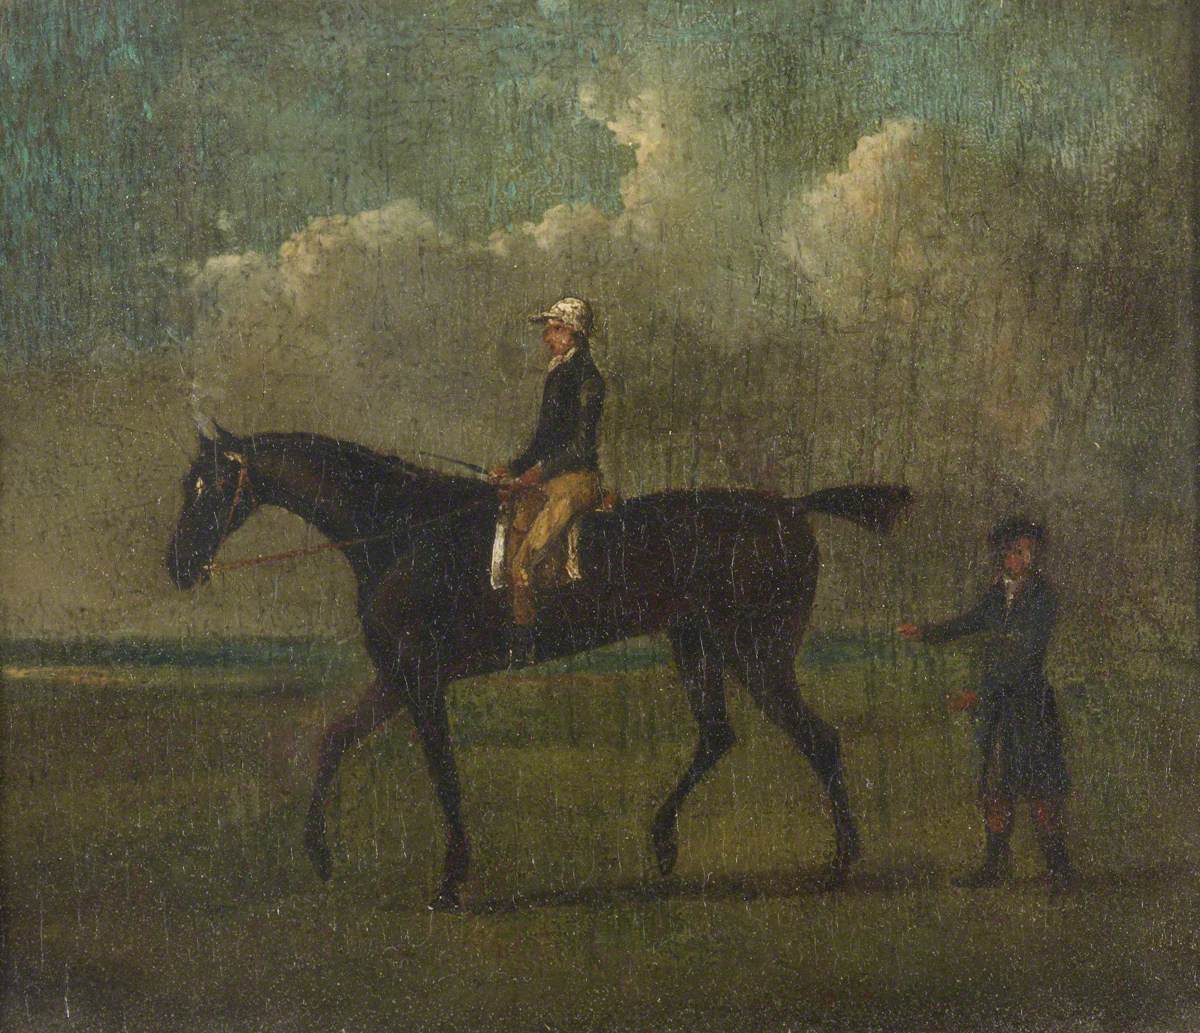 A Racehorse with Jockey up and an Attendant